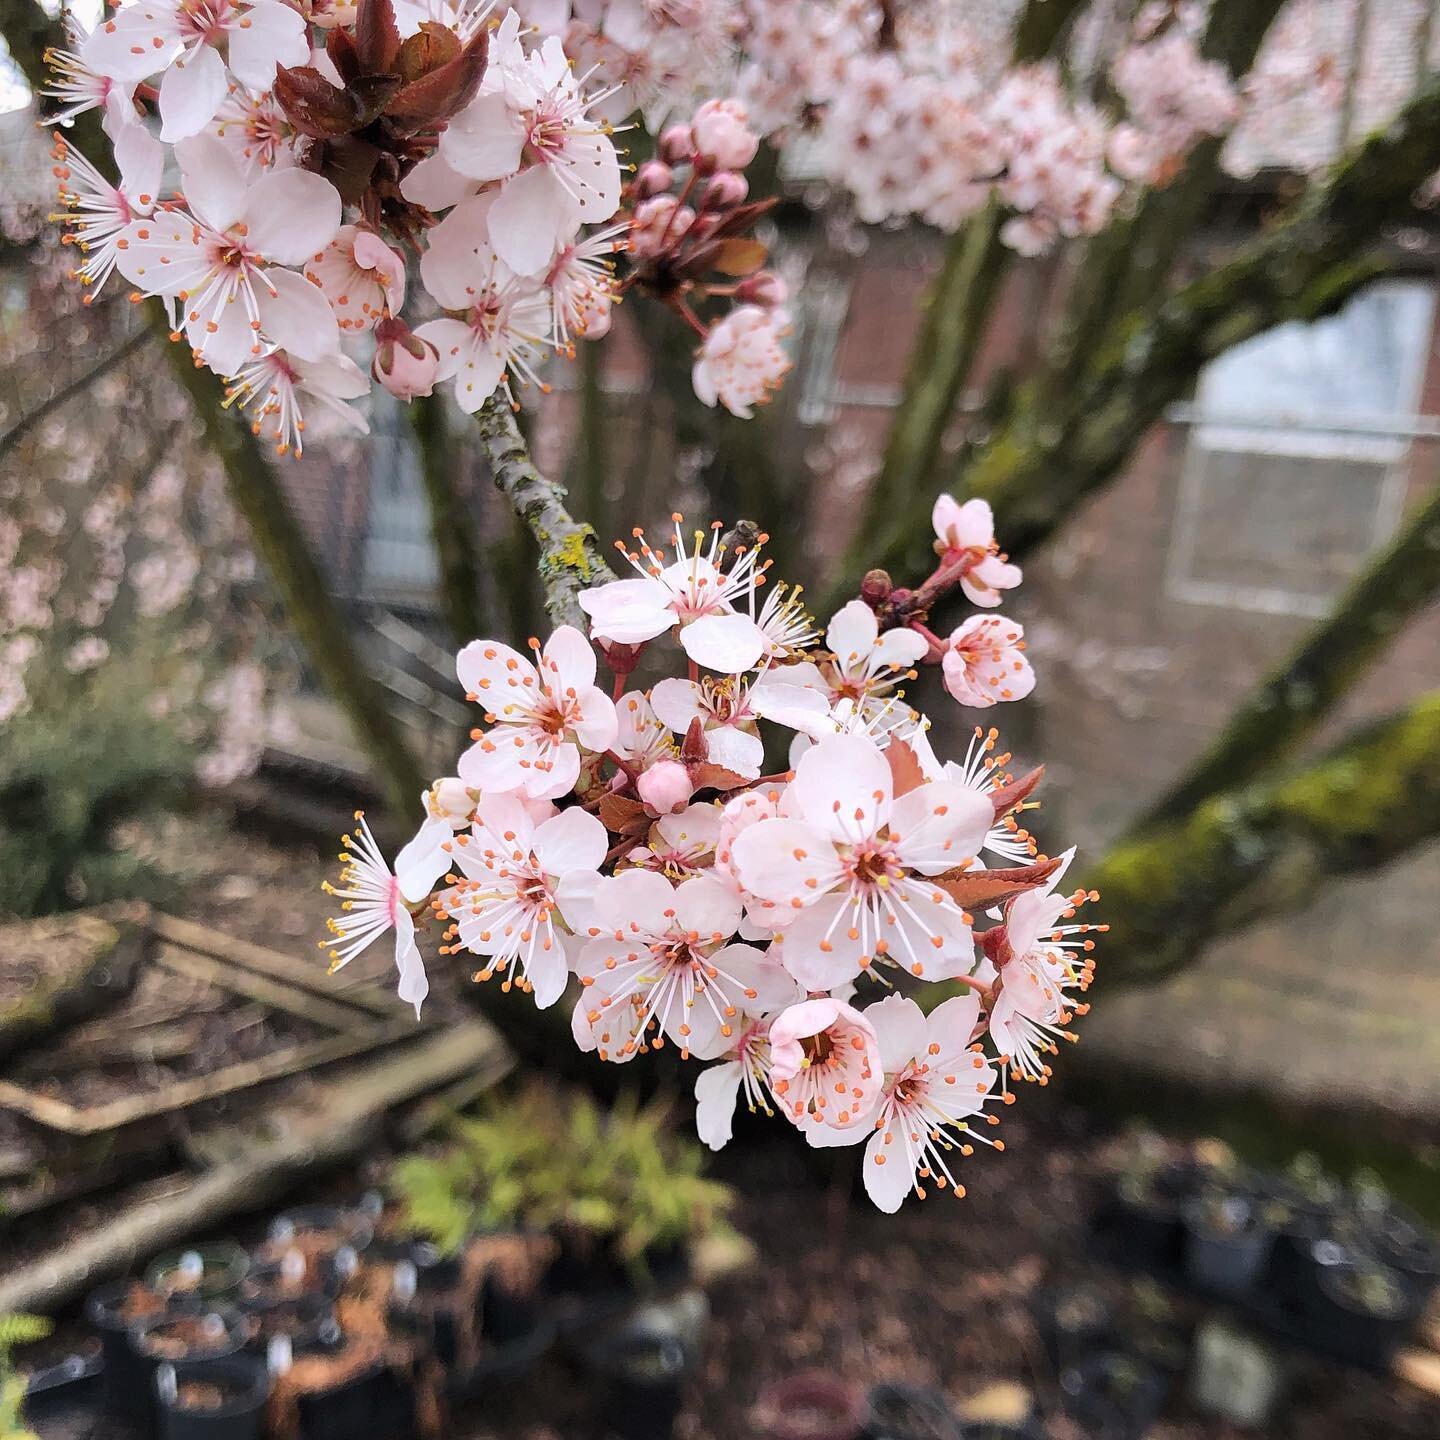 Plants are waking up in the nursery!

Our moving sale goes till 3/30 - order online before Friday for 20% off.

Pick up your plants 3/31-4/2 in Overlook Neighborhood, North Portland.

There are some species sold out but a LOT of wonderful things stil